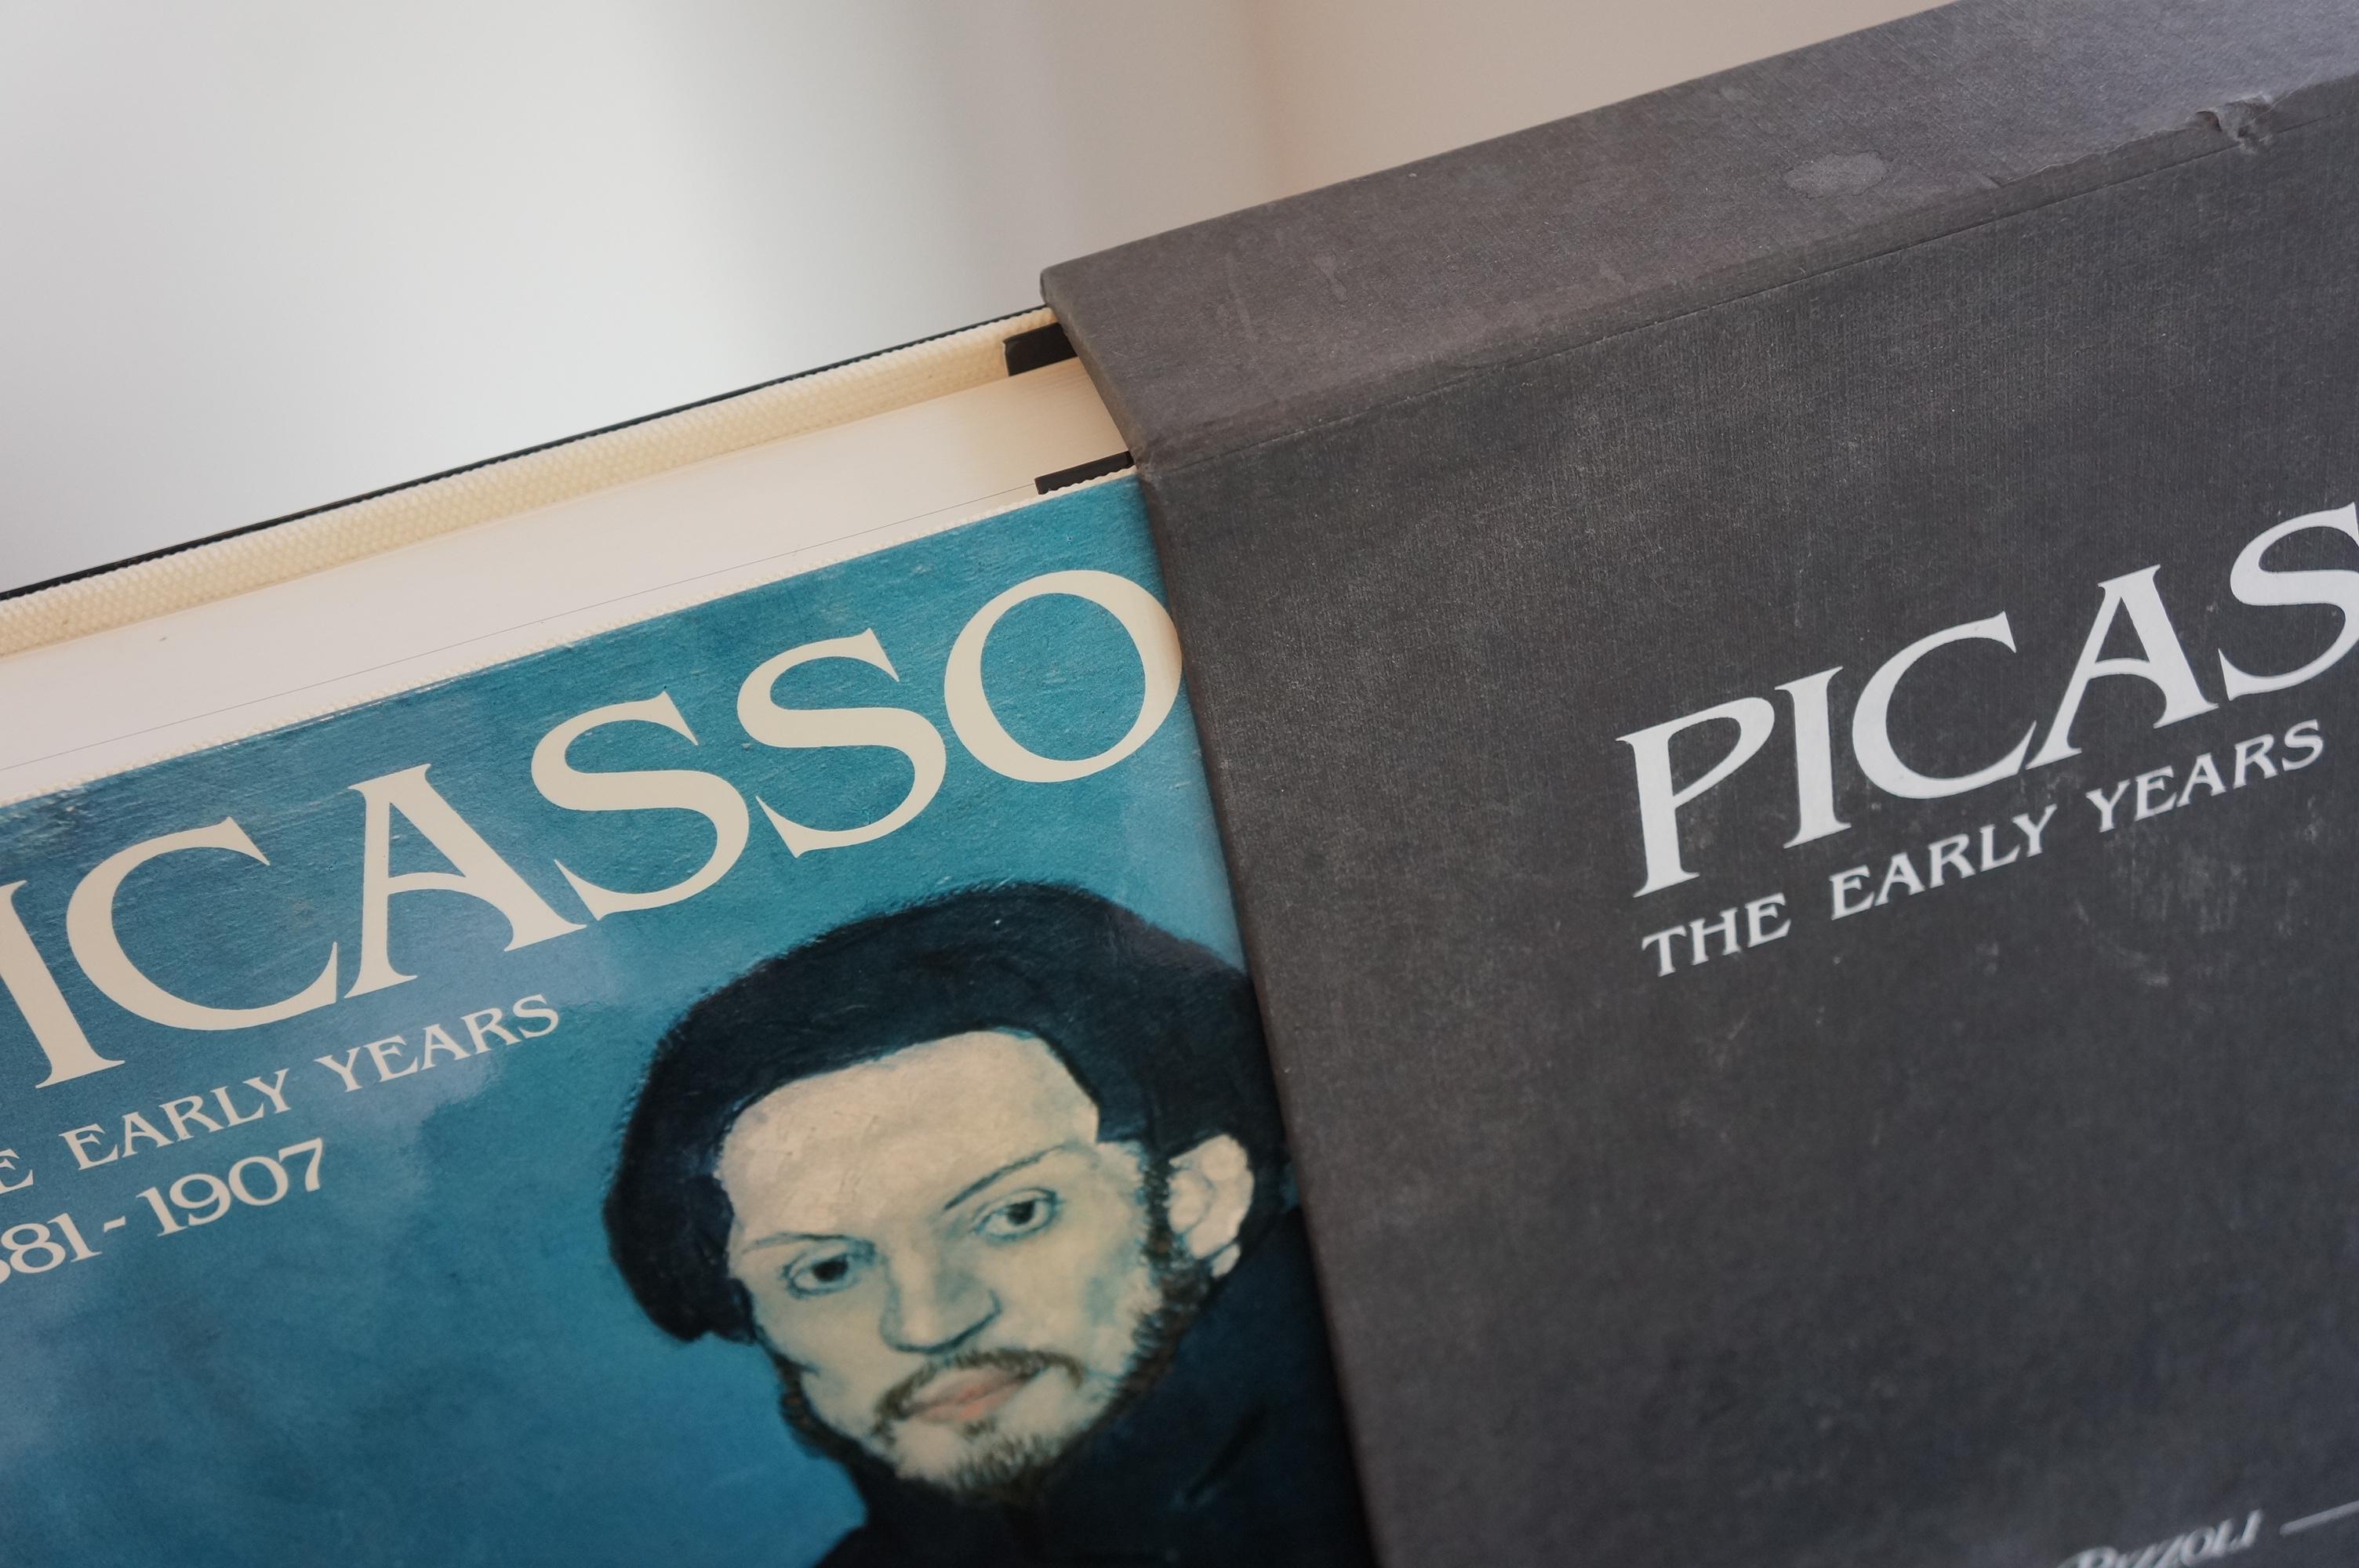 Other ‘Picasso The Early Years 1881-1907’ Hardcover Art Book by Palau i Fabre  For Sale